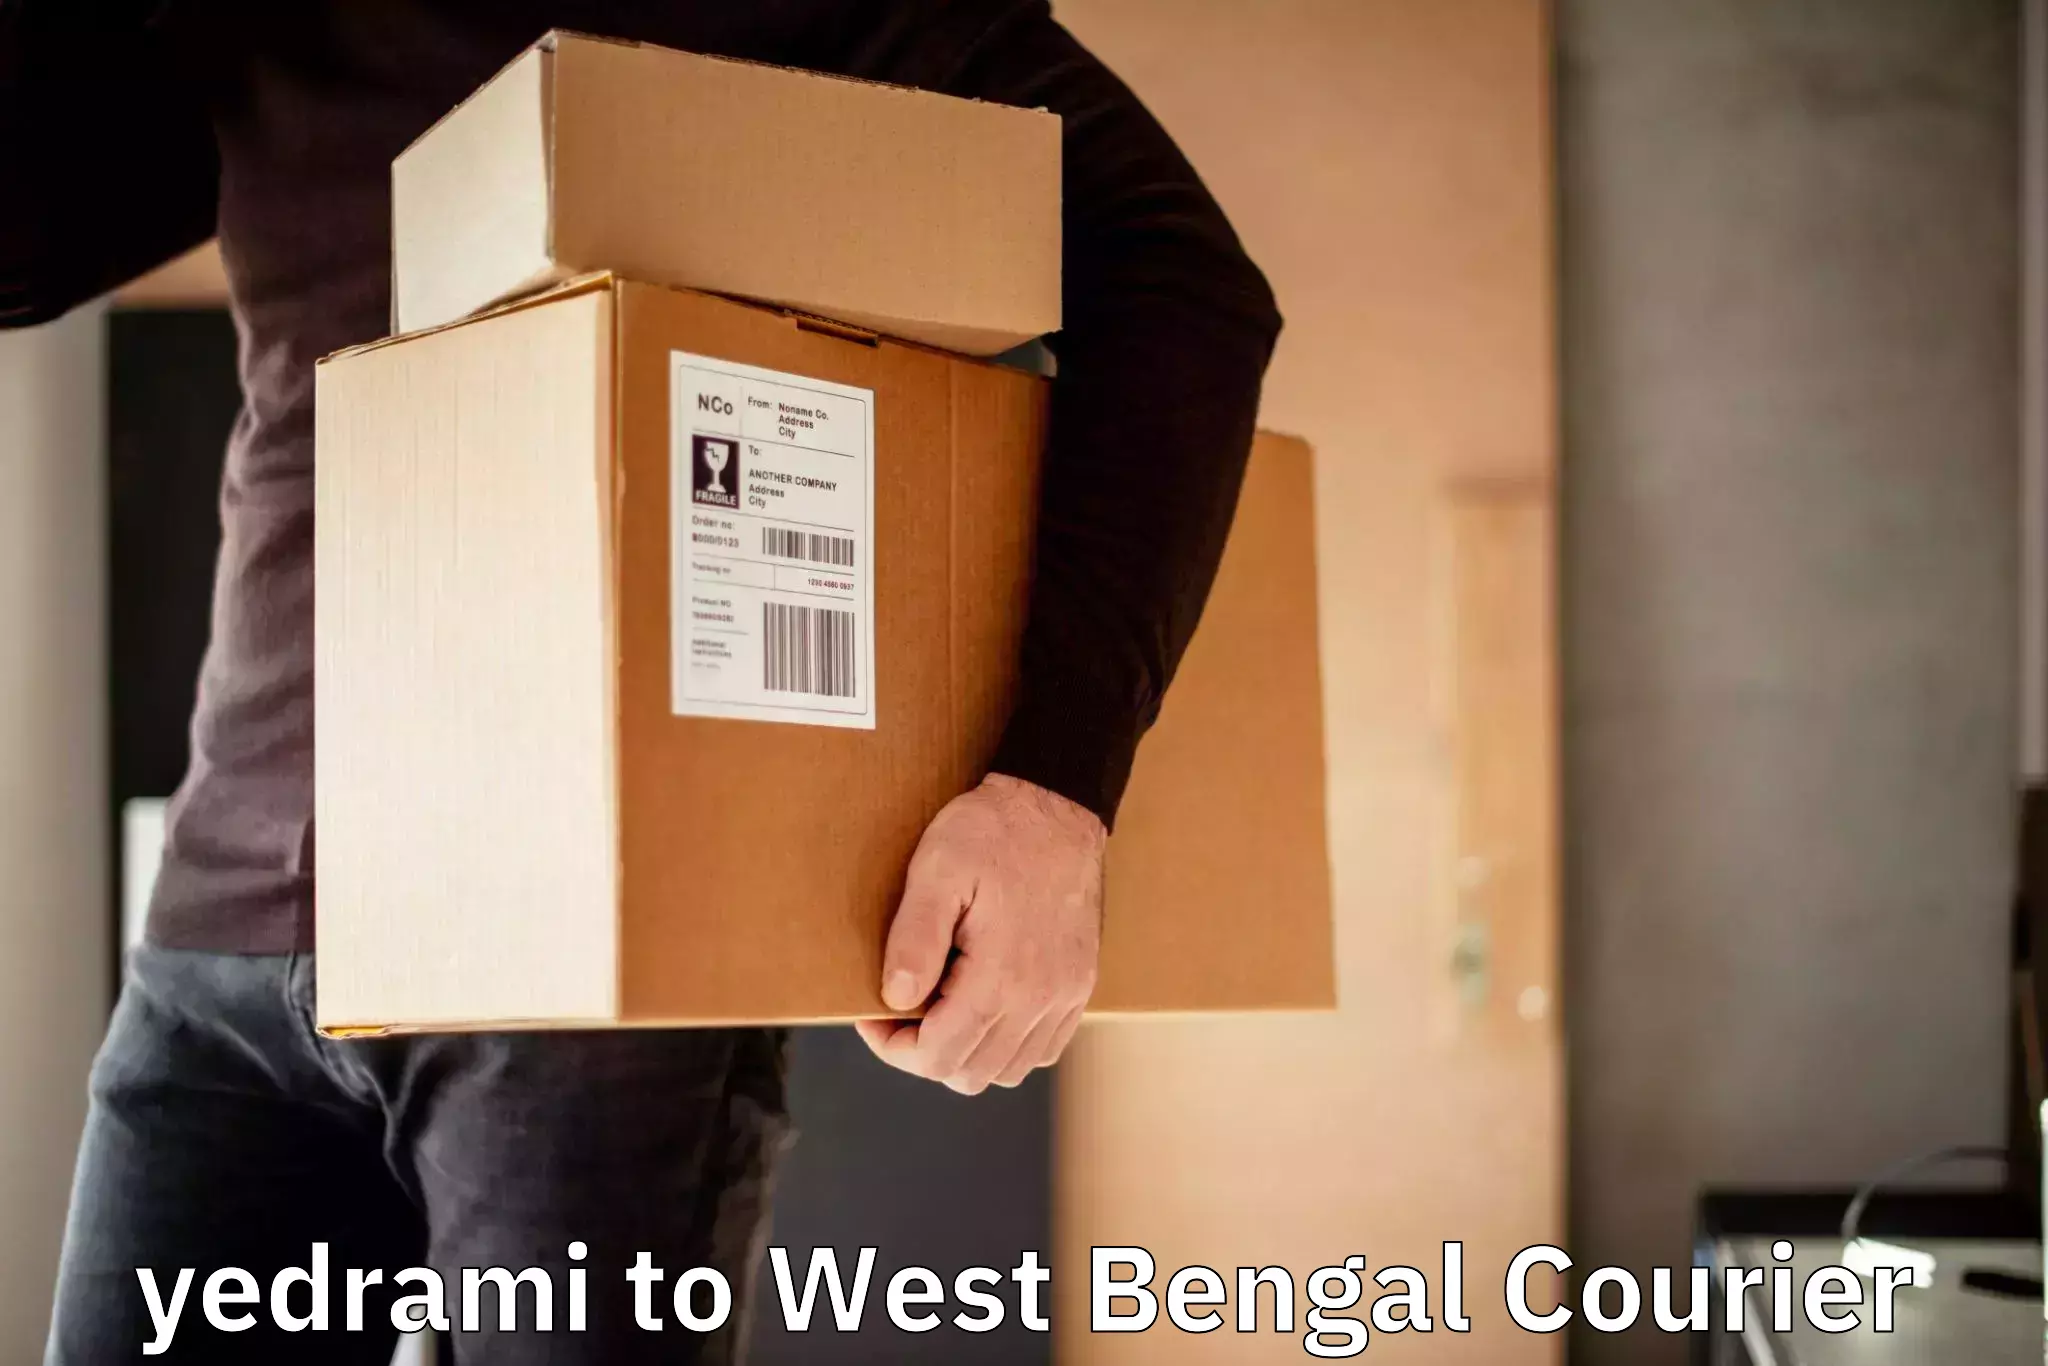 Lightweight courier yedrami to West Bengal